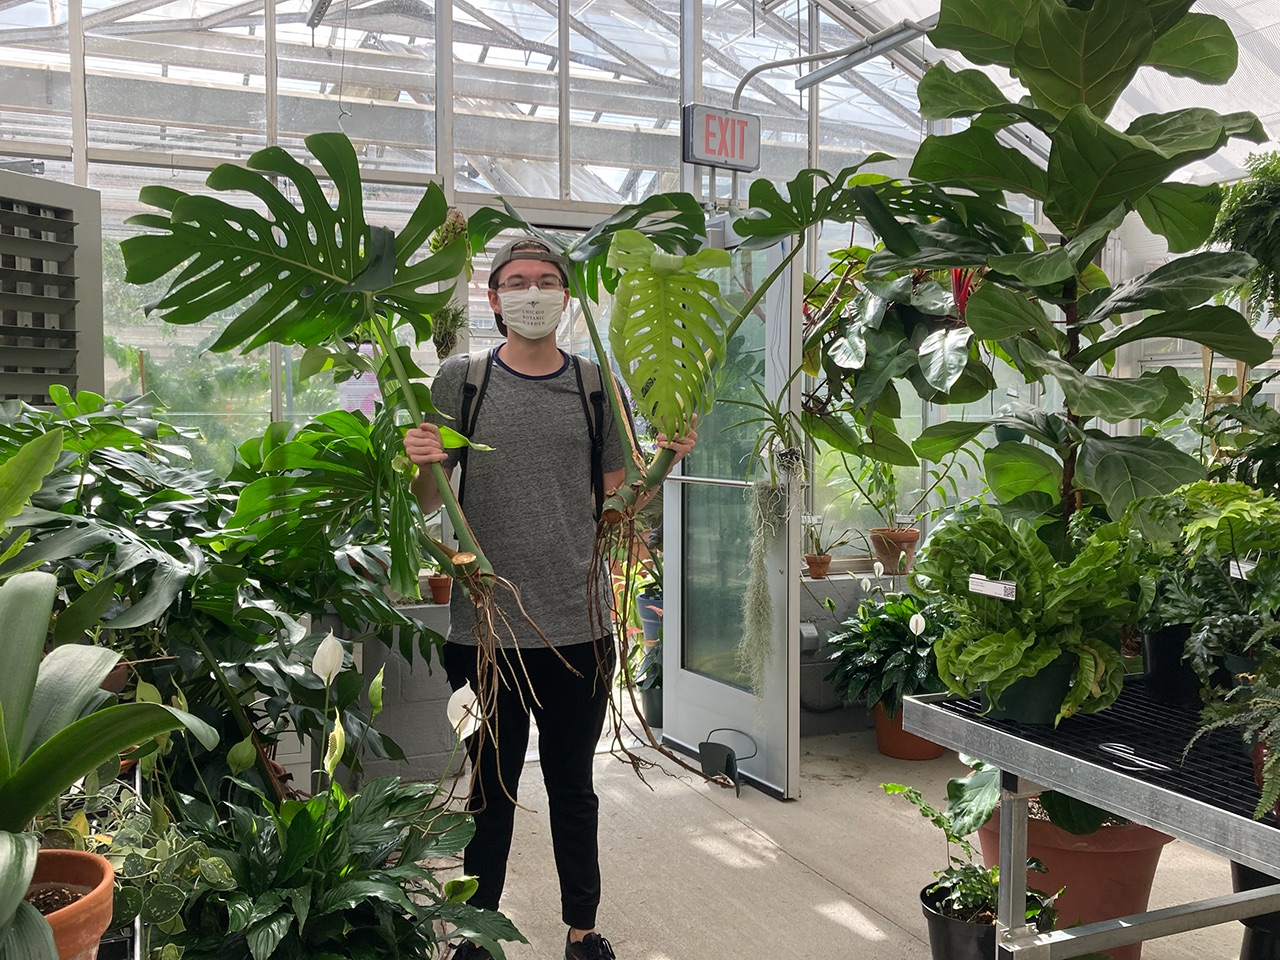 masked student in the greenhouse holding large palm leaves